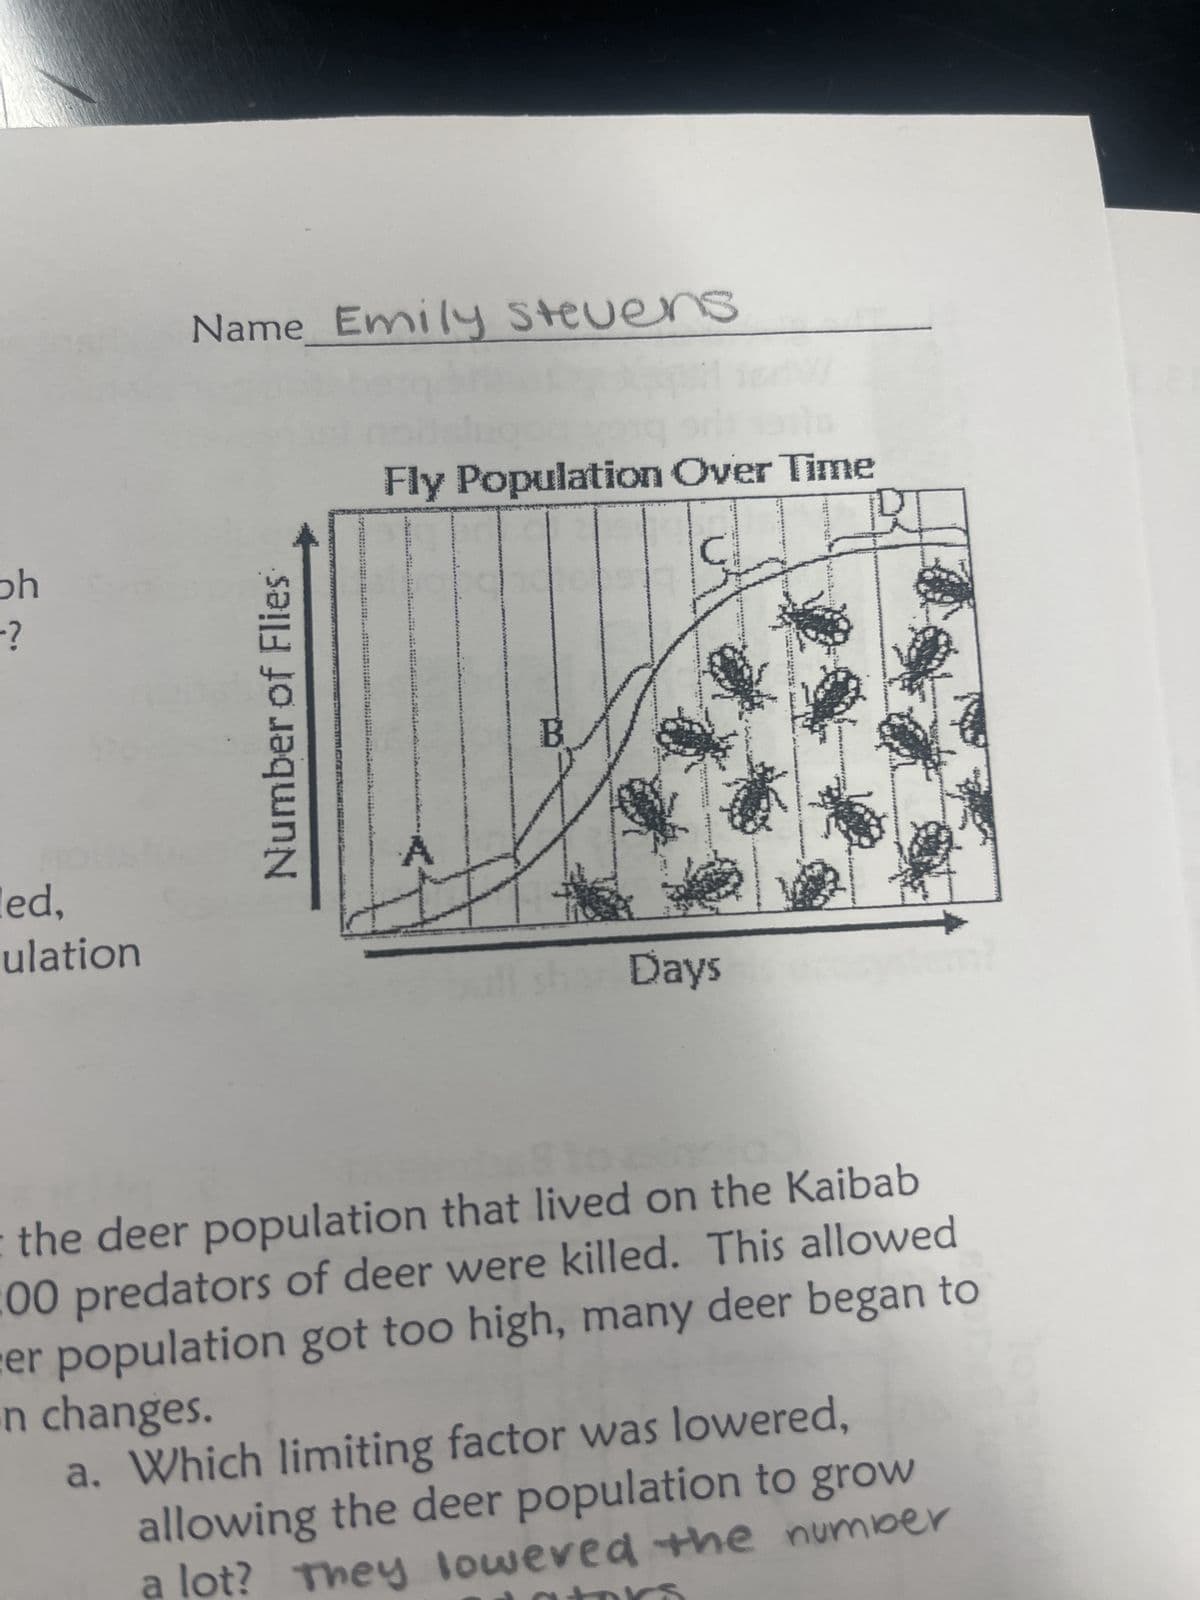 bh
?
ed,
ulation
Name Emily Stevens
Number of Flies
Fly Population Over Time
B
Days
www
the deer population that lived on the Kaibab
00 predators of deer were killed. This allowed
er population got too high, many deer began to
n changes.
a. Which limiting factor was lowered,
allowing the deer population to grow
lot? They lowered the number